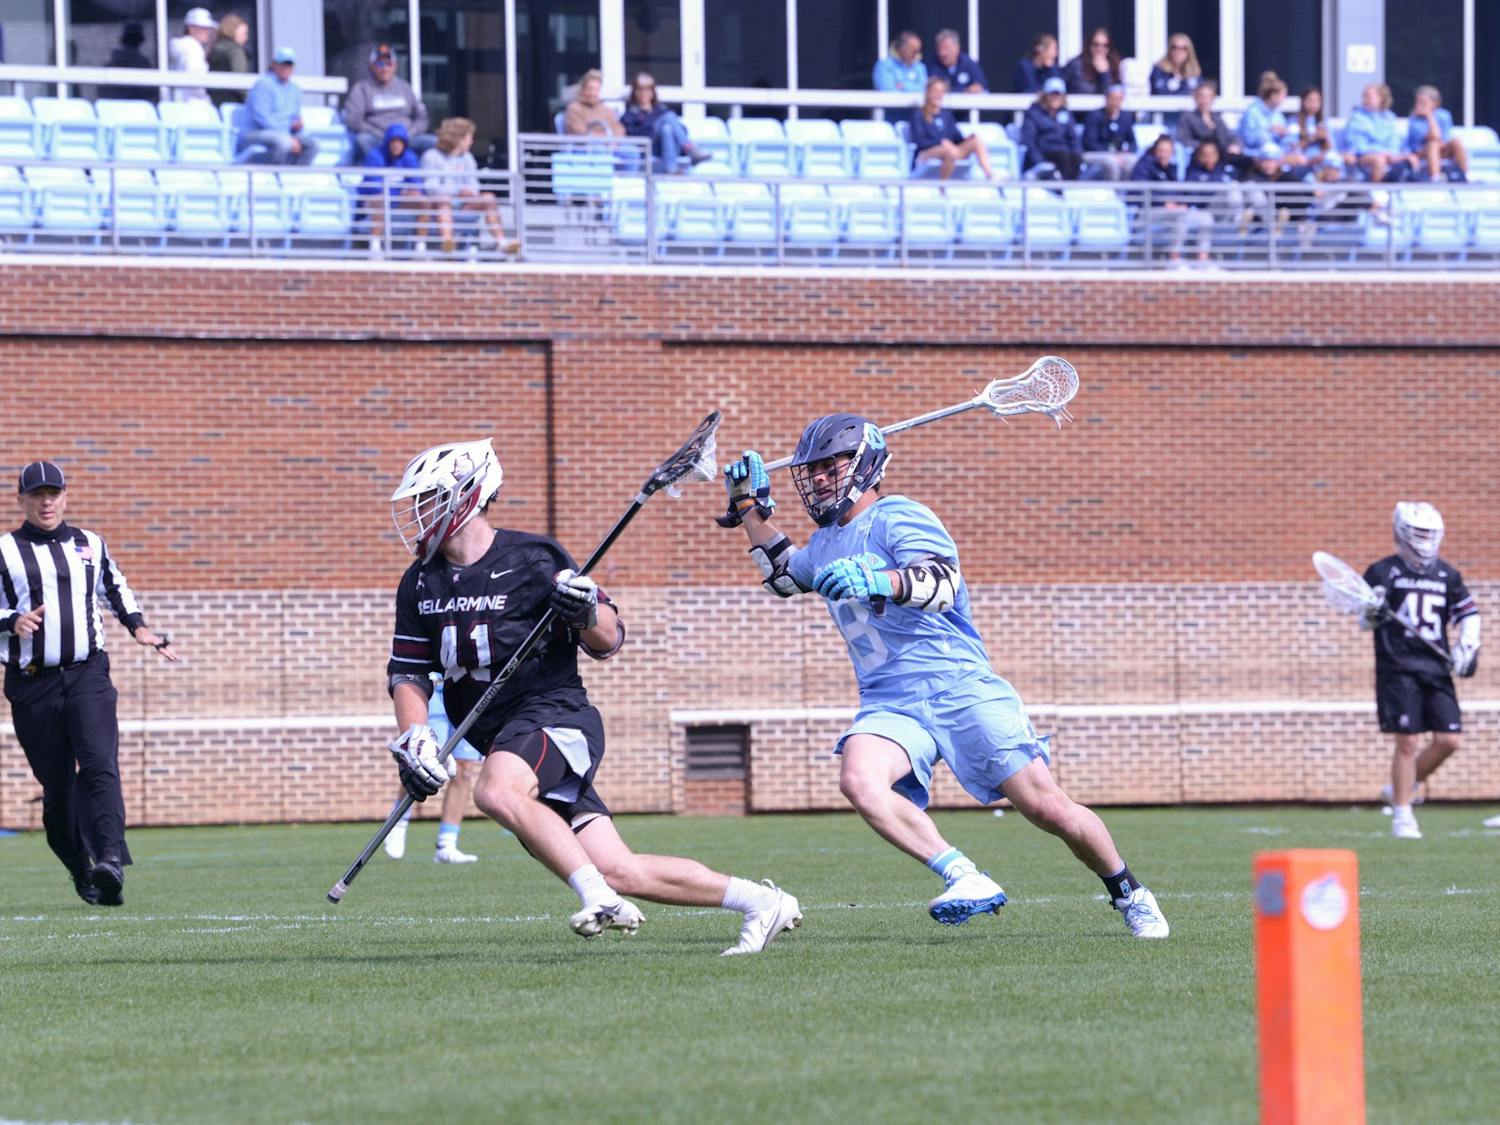 Senior attackman Nicky Soloman (8) chases his opponent during Carolina Men's Lacrosse's home game against Bellarmine on Saturday, March 26, 2022. UNC won 15-8.